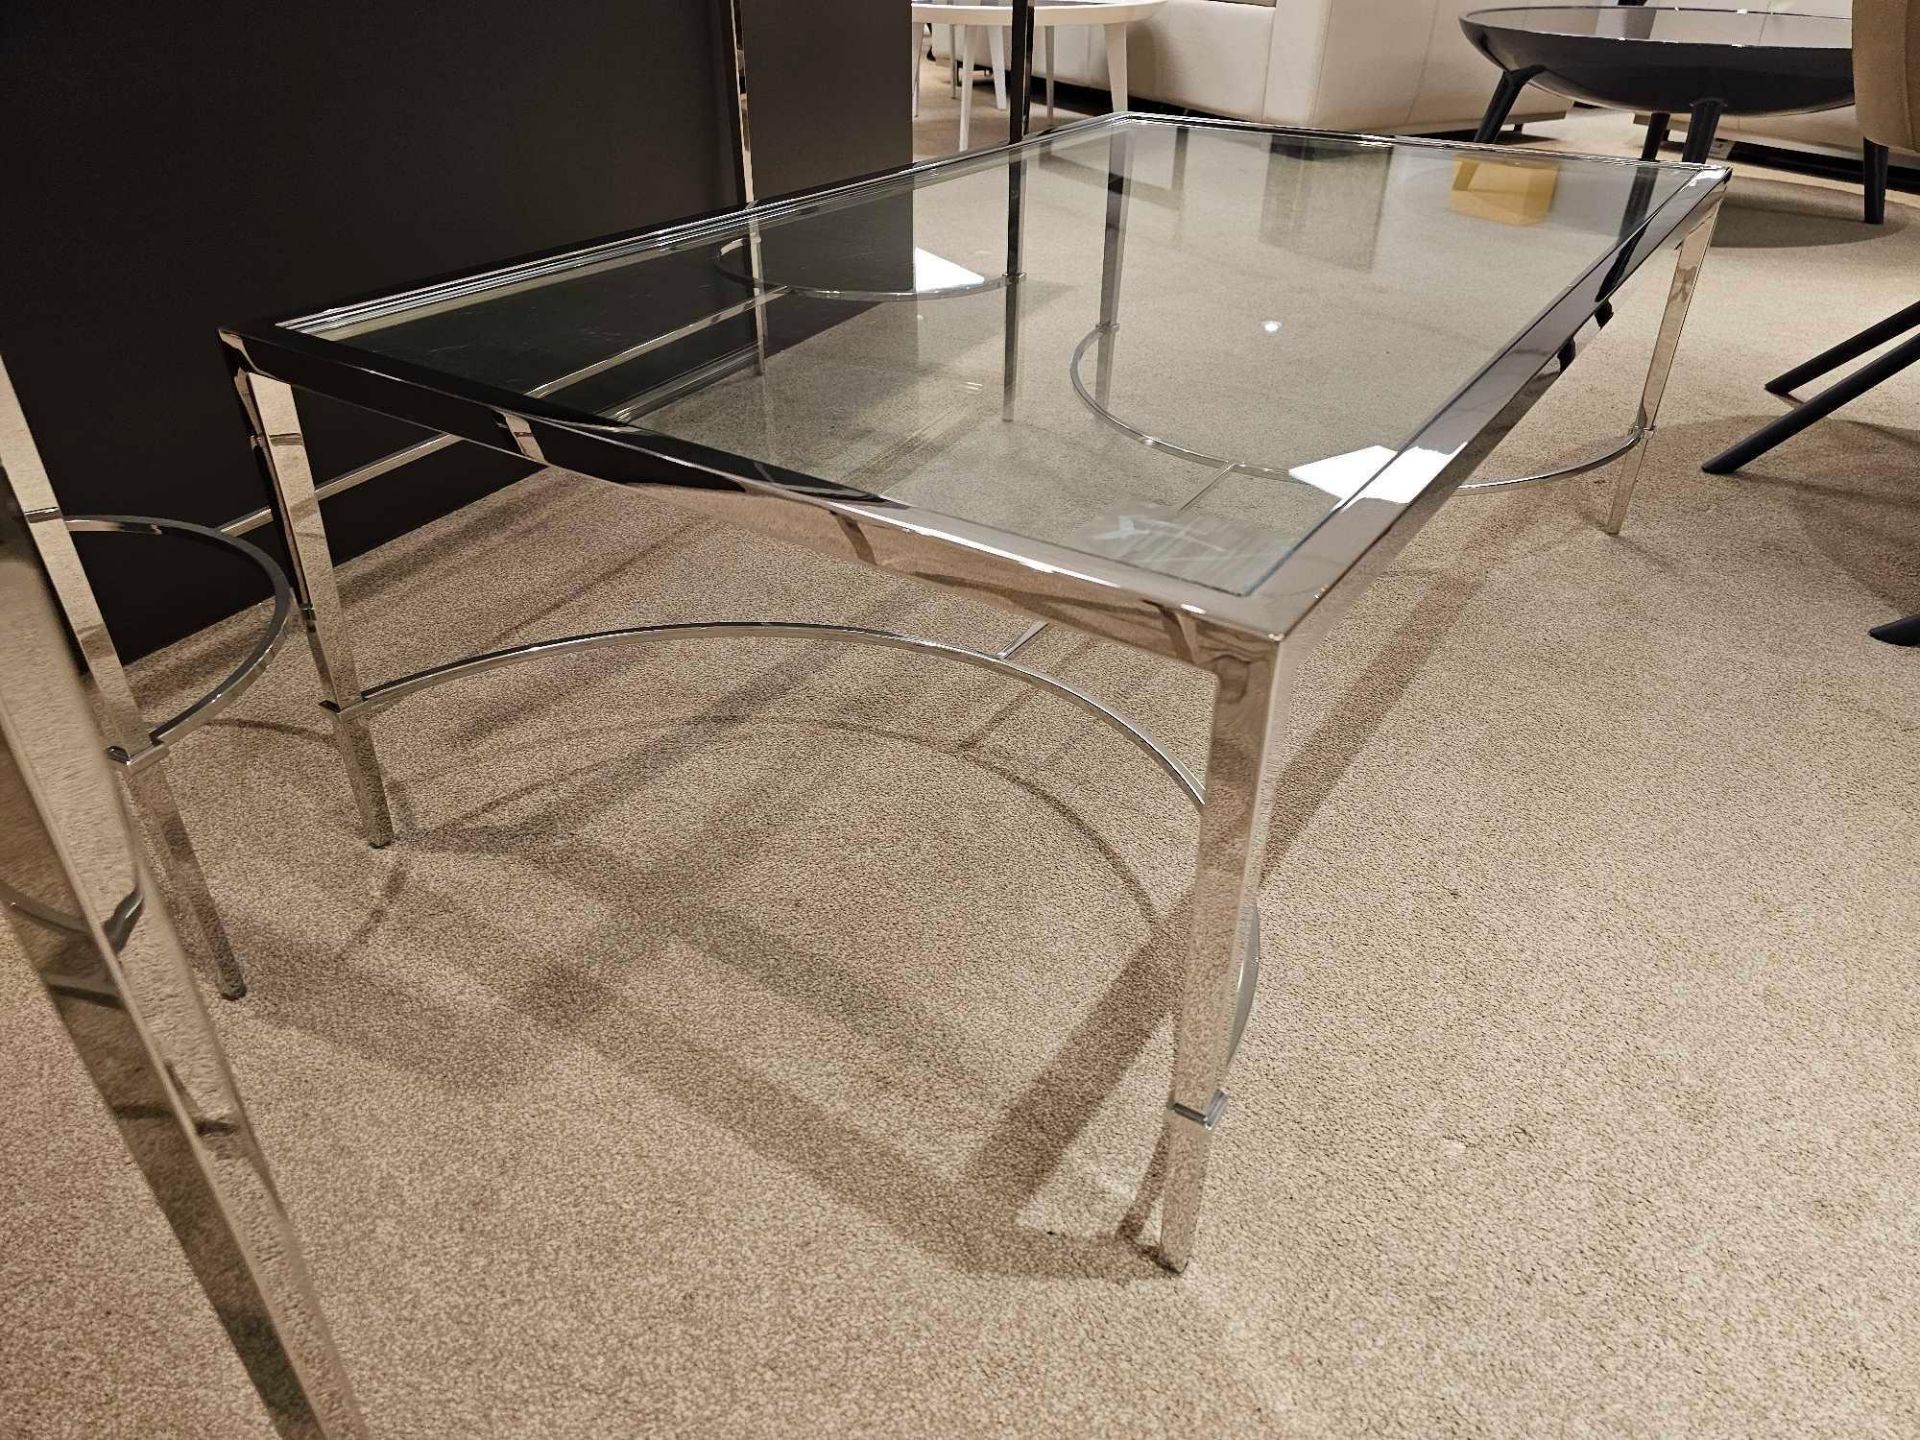 Tokyo Coffee Table by Kesterport The Tokyo coffee table with its clear glass top and a refined - Image 3 of 6